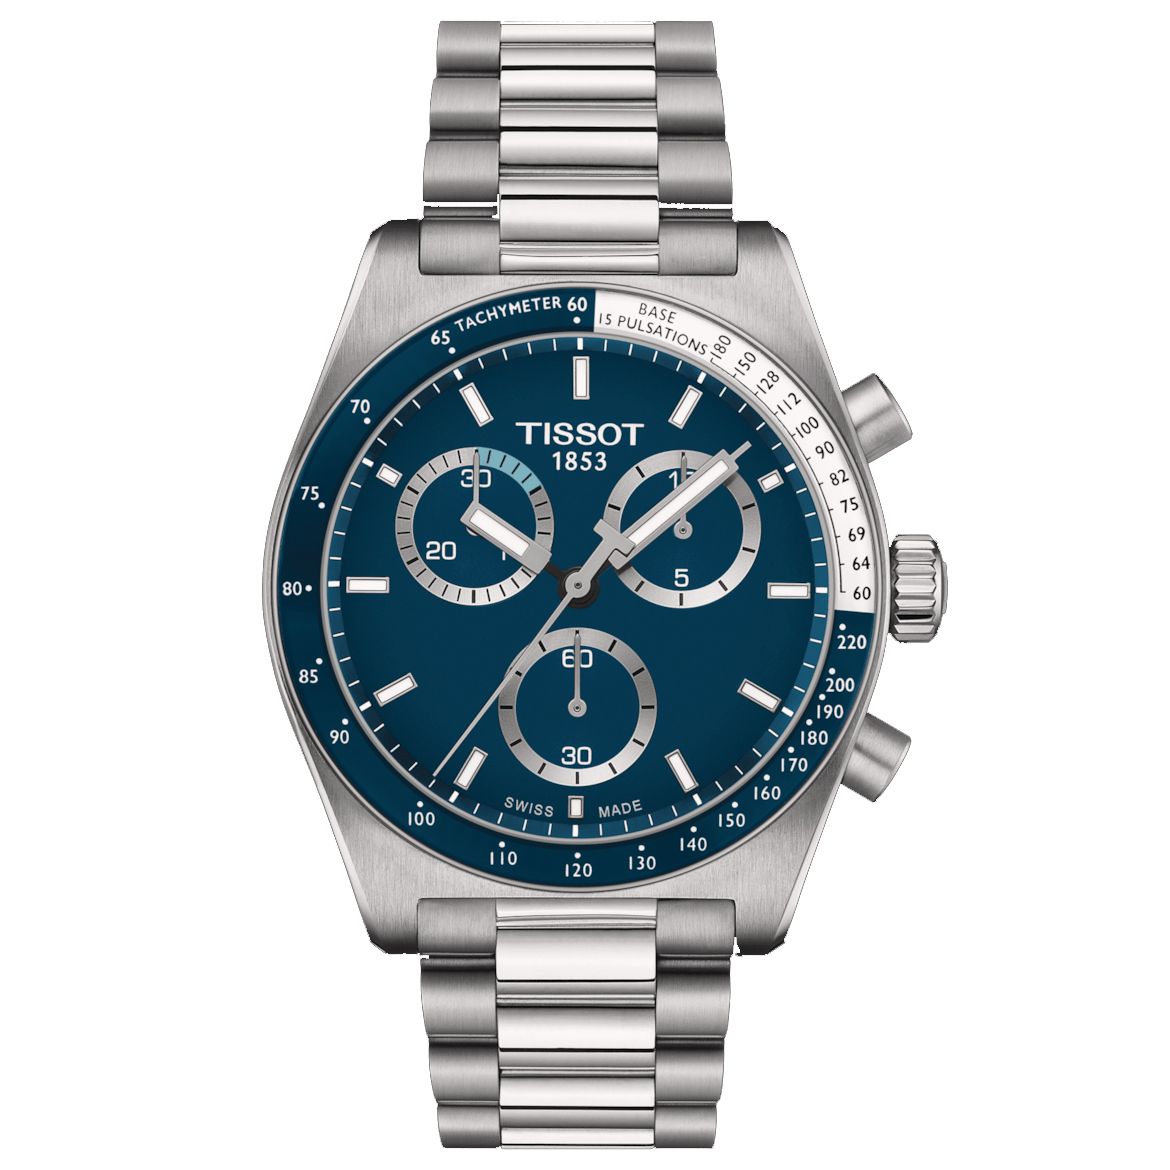 Tissot T-Sport PR516 Chronograph Blue Dial Stainless Steel Watch 40mm (T1494171104100)